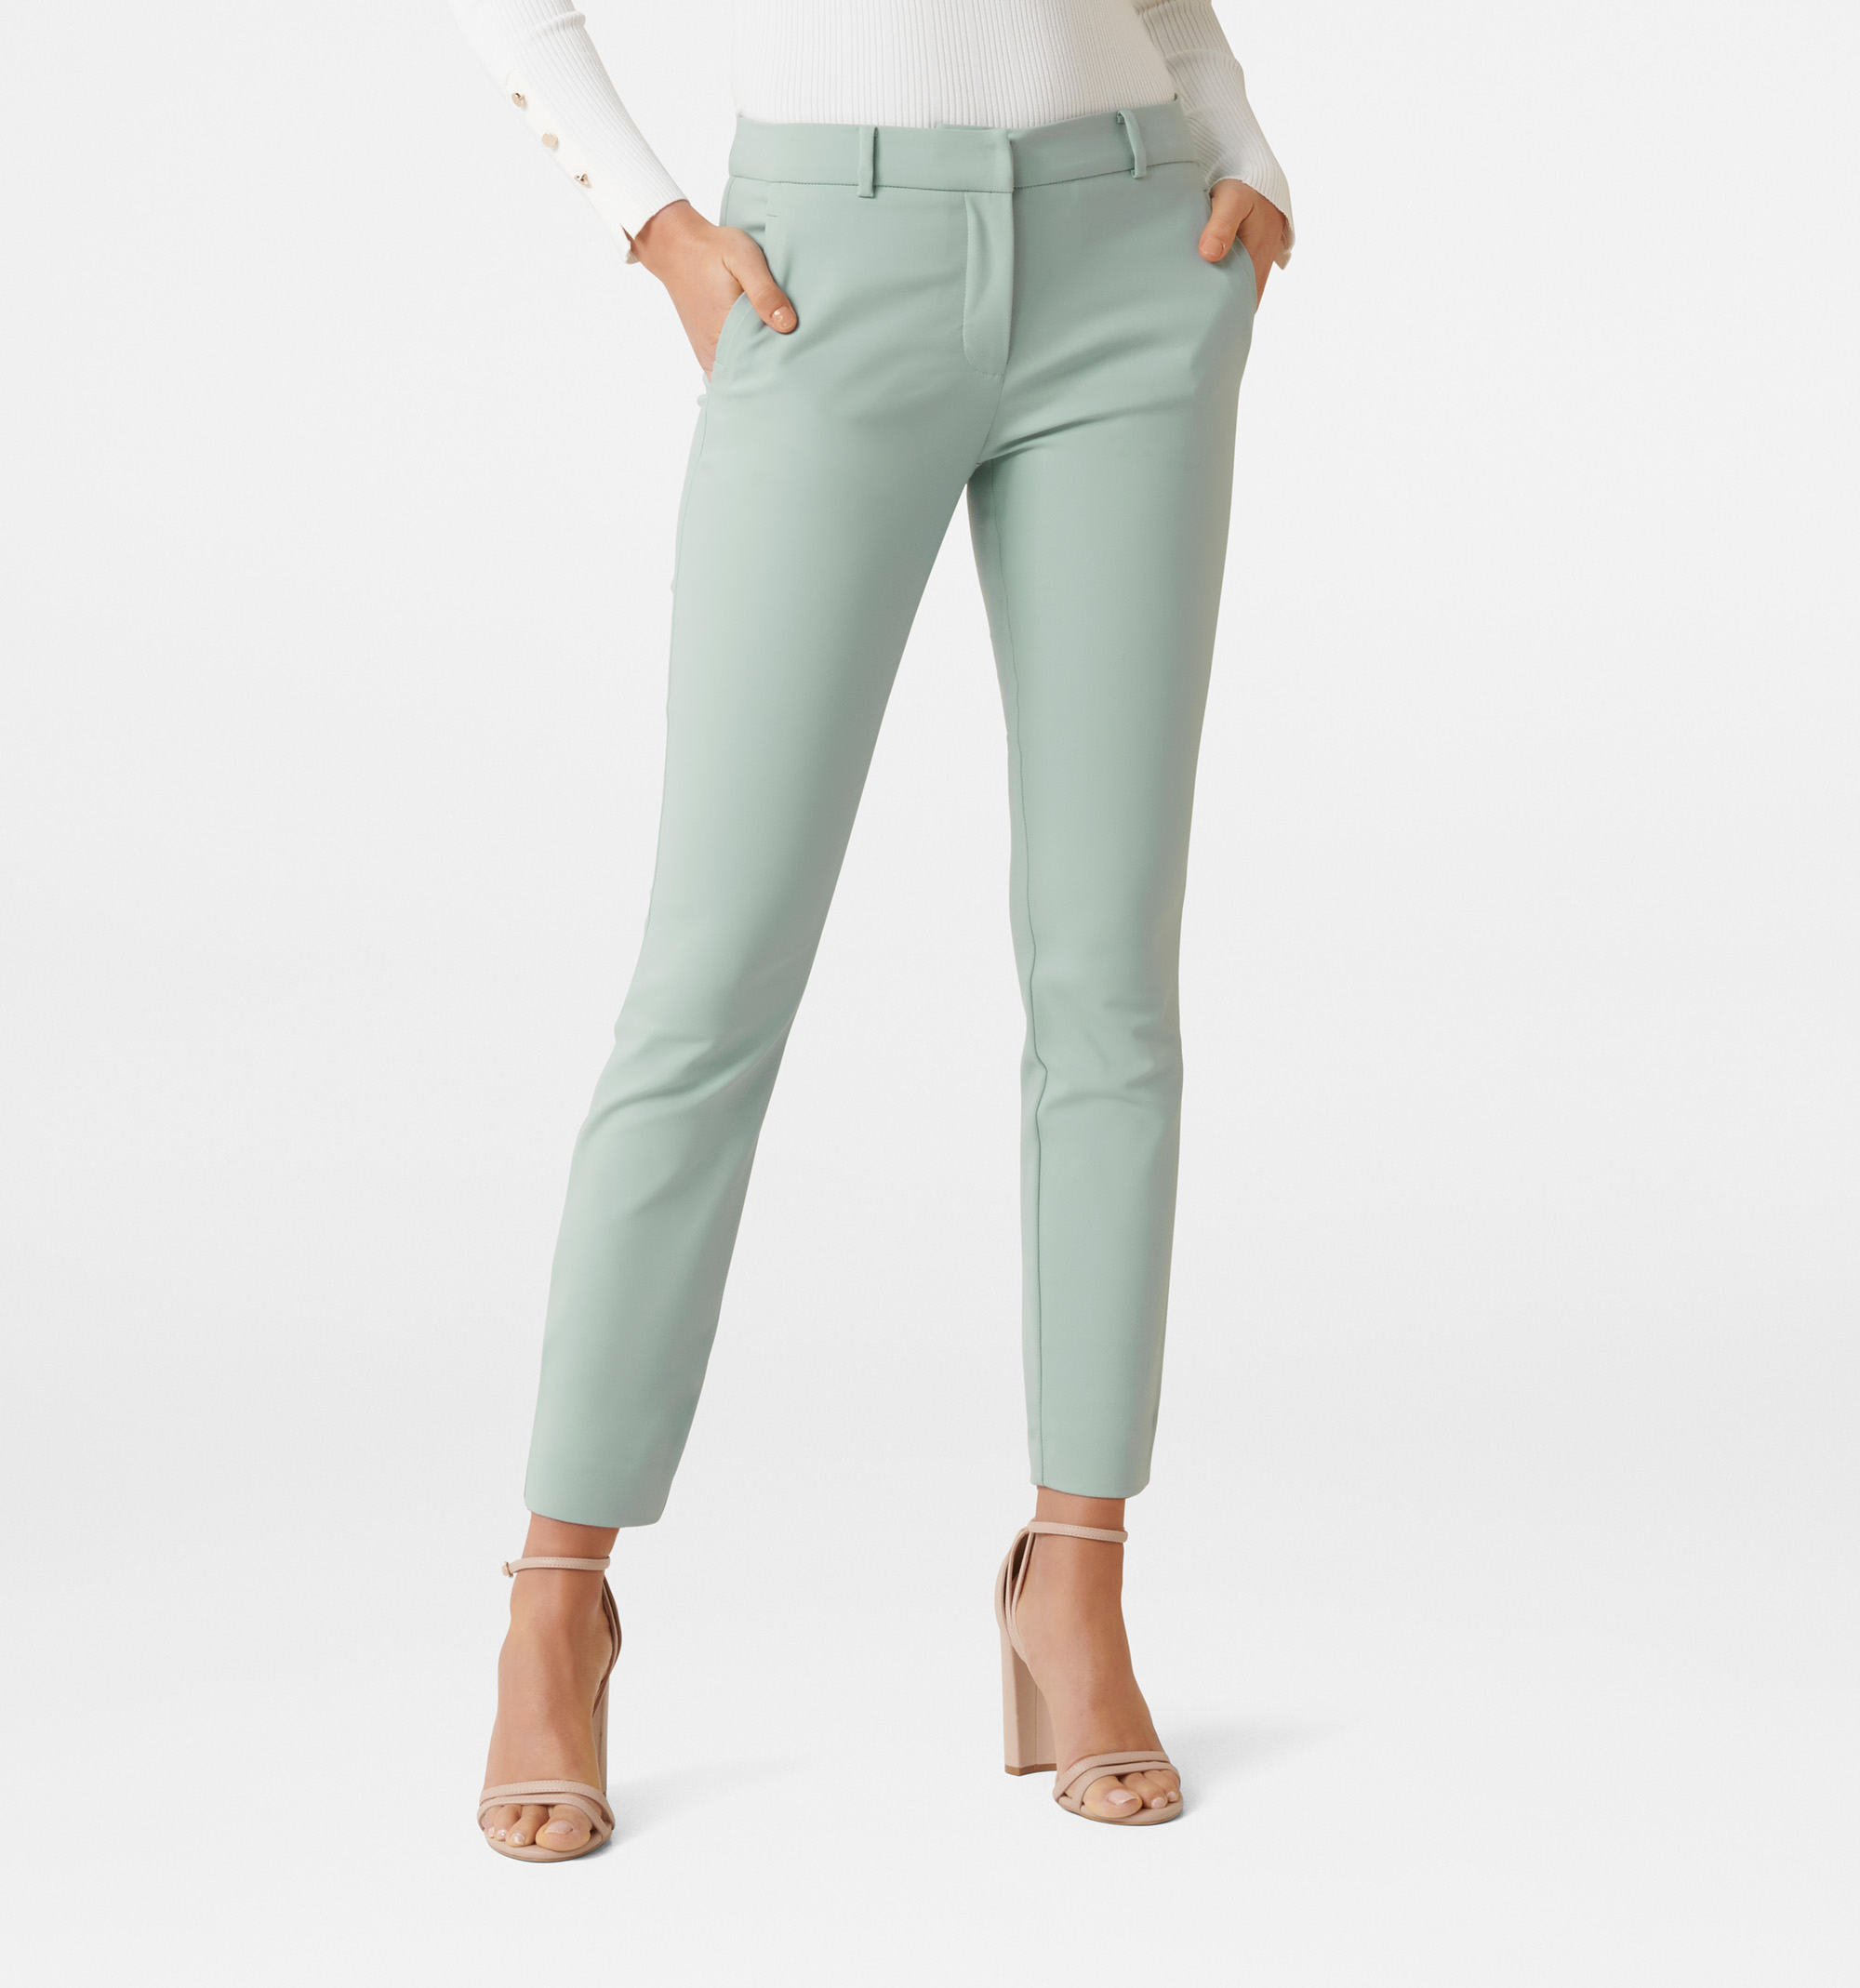 Buy White Trousers & Pants for Women by Forever New Online | Ajio.com